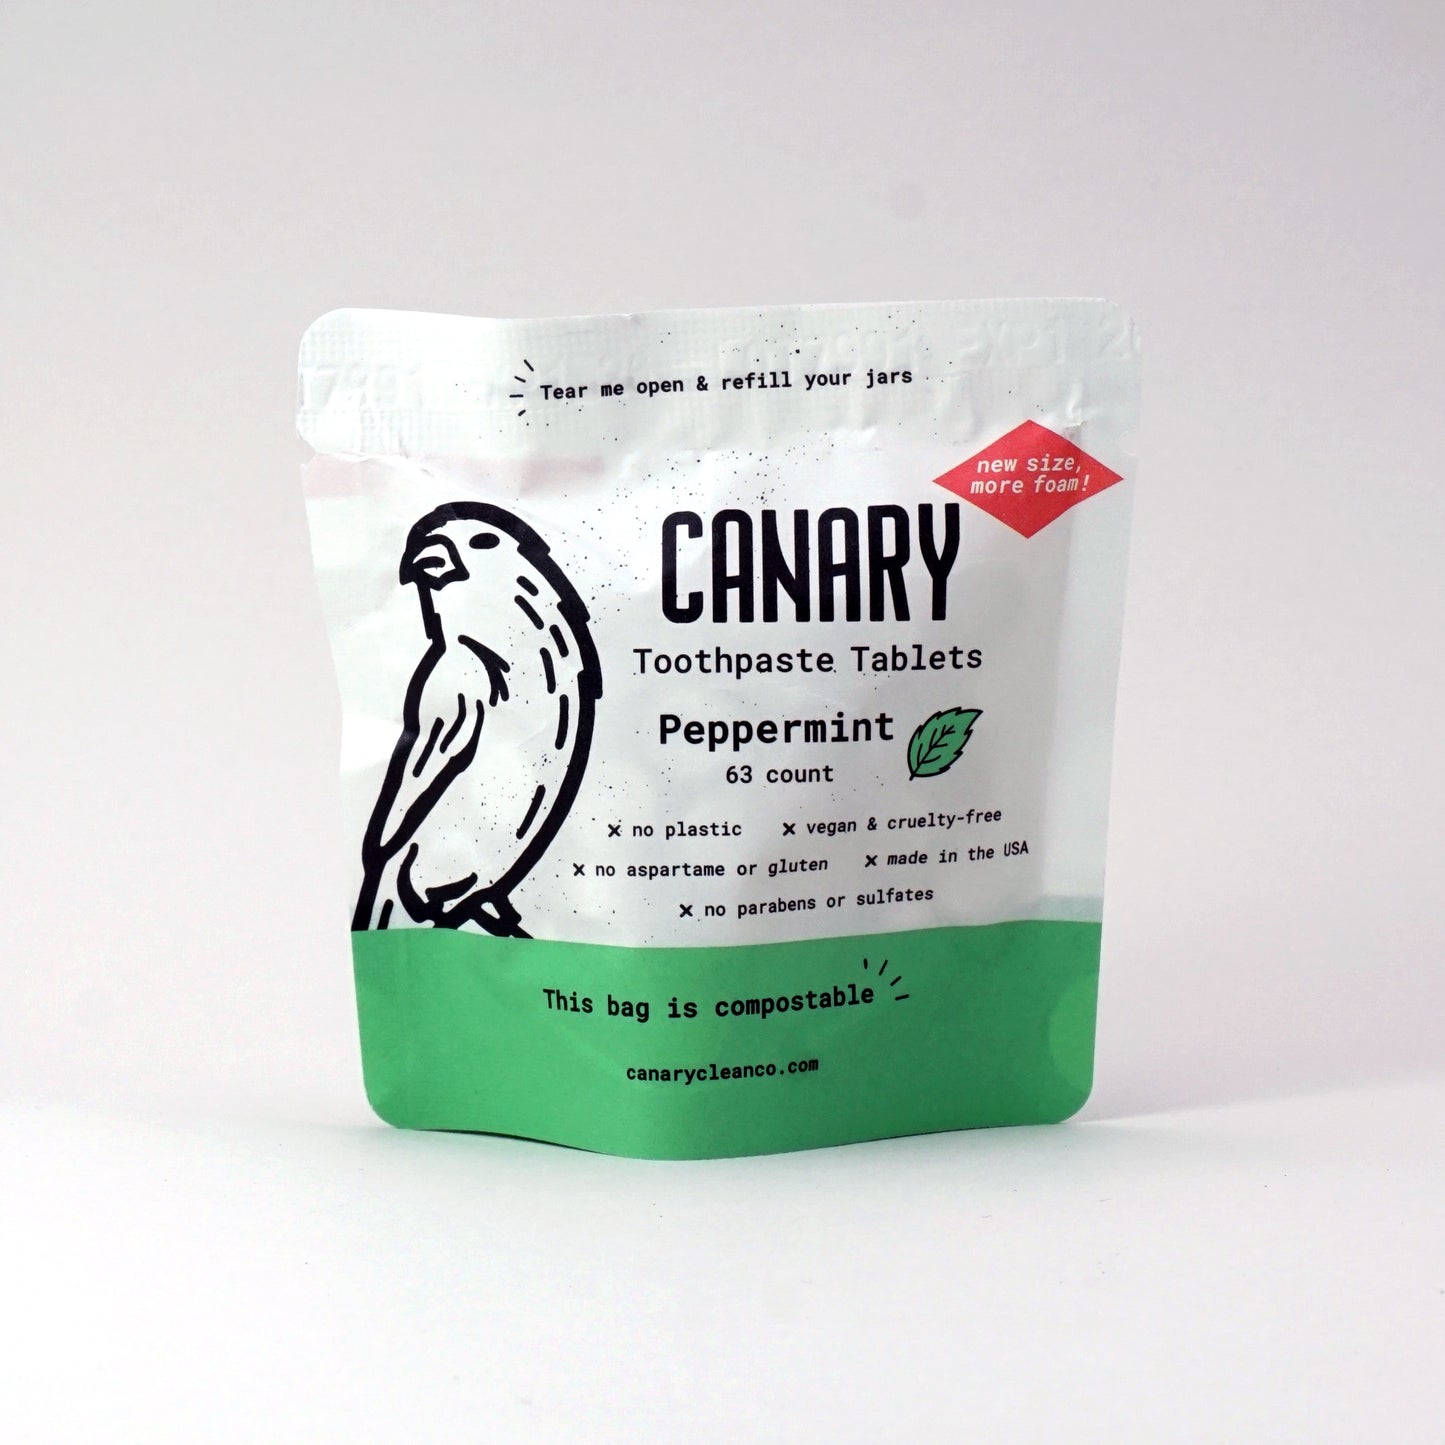 Canary Peppermint Toothpaste Tablets, 63count pouch, one month supply